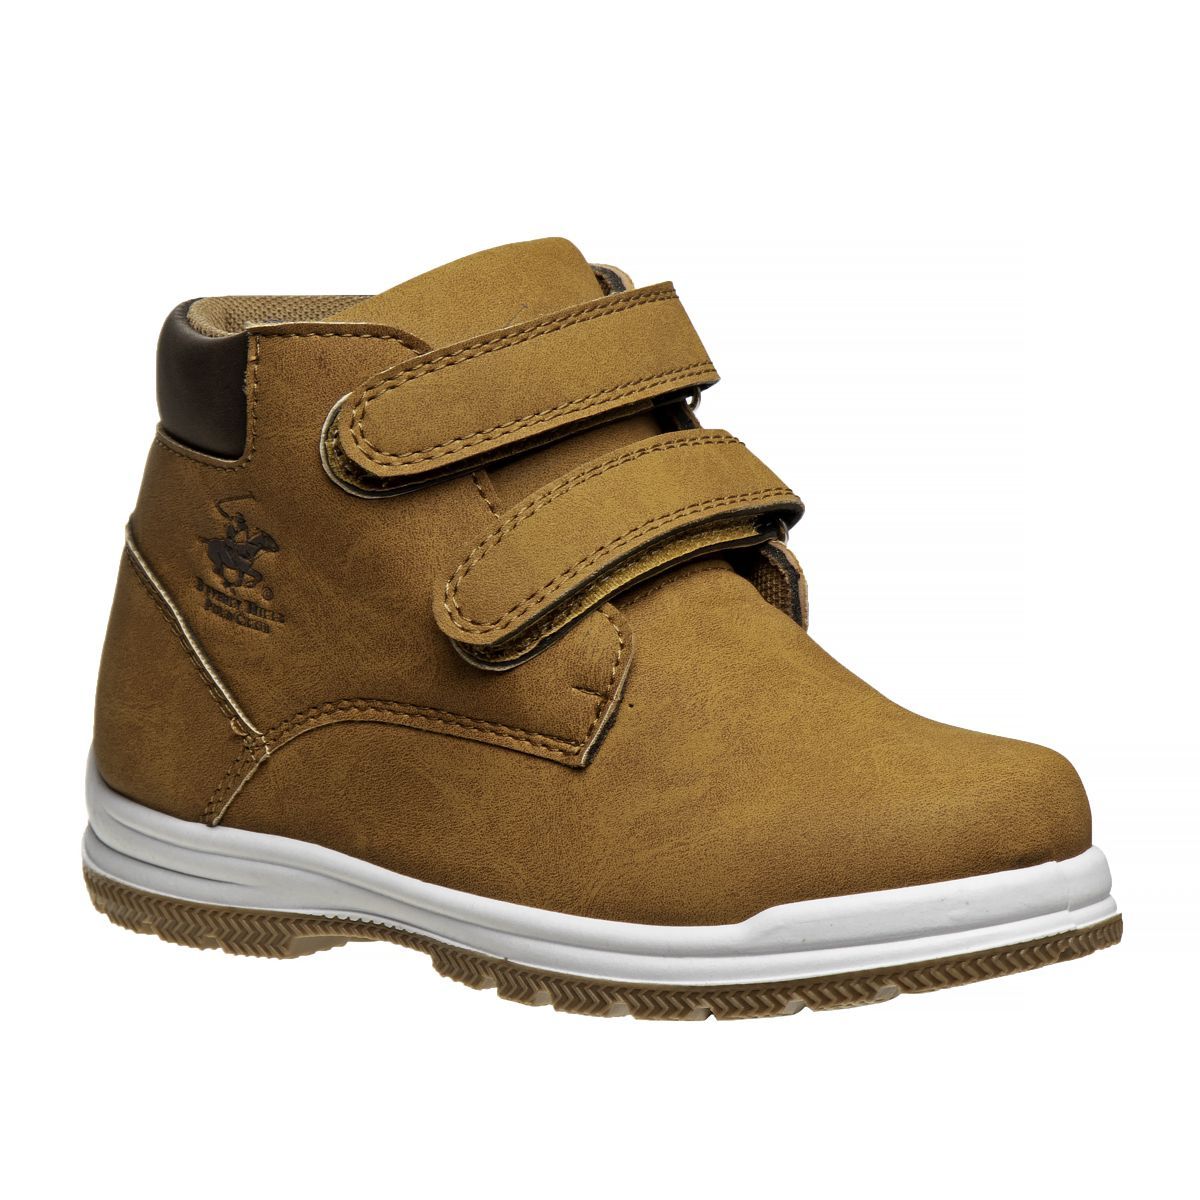 Beverly Hills Polo Club Toddler Boy's High-Top Boots | Target